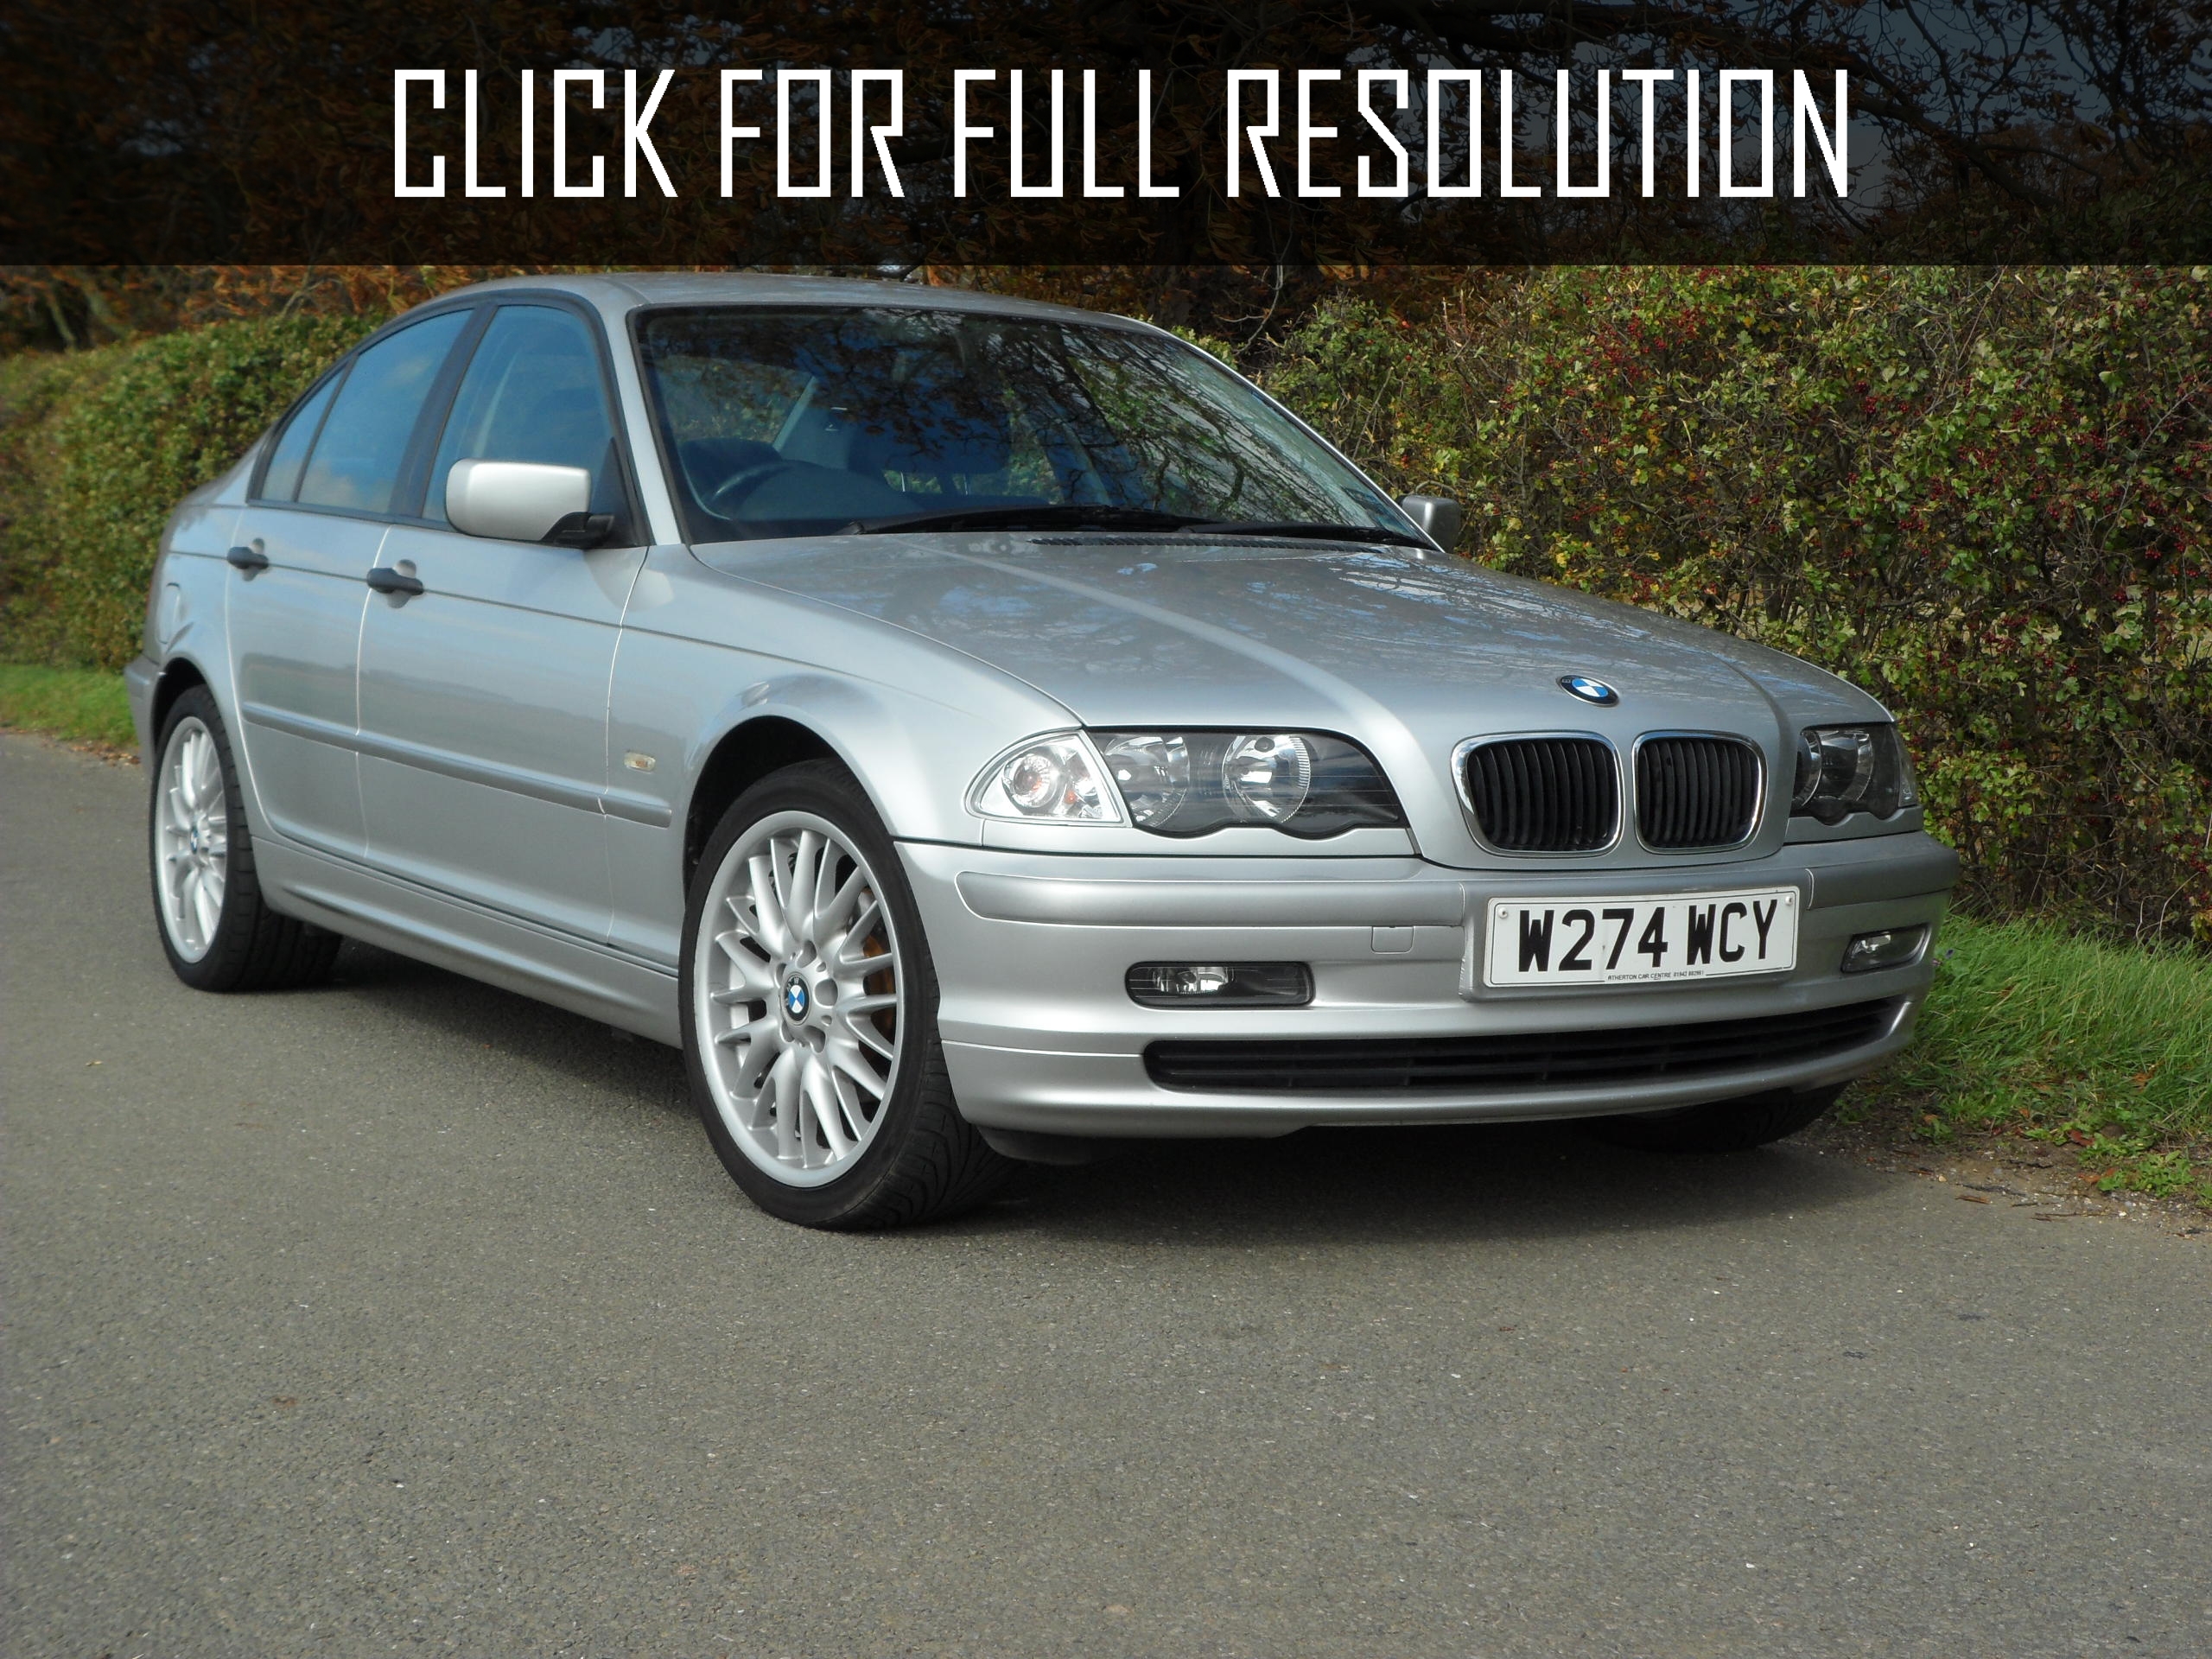 2000 Bmw 318i news, reviews, msrp, ratings with amazing